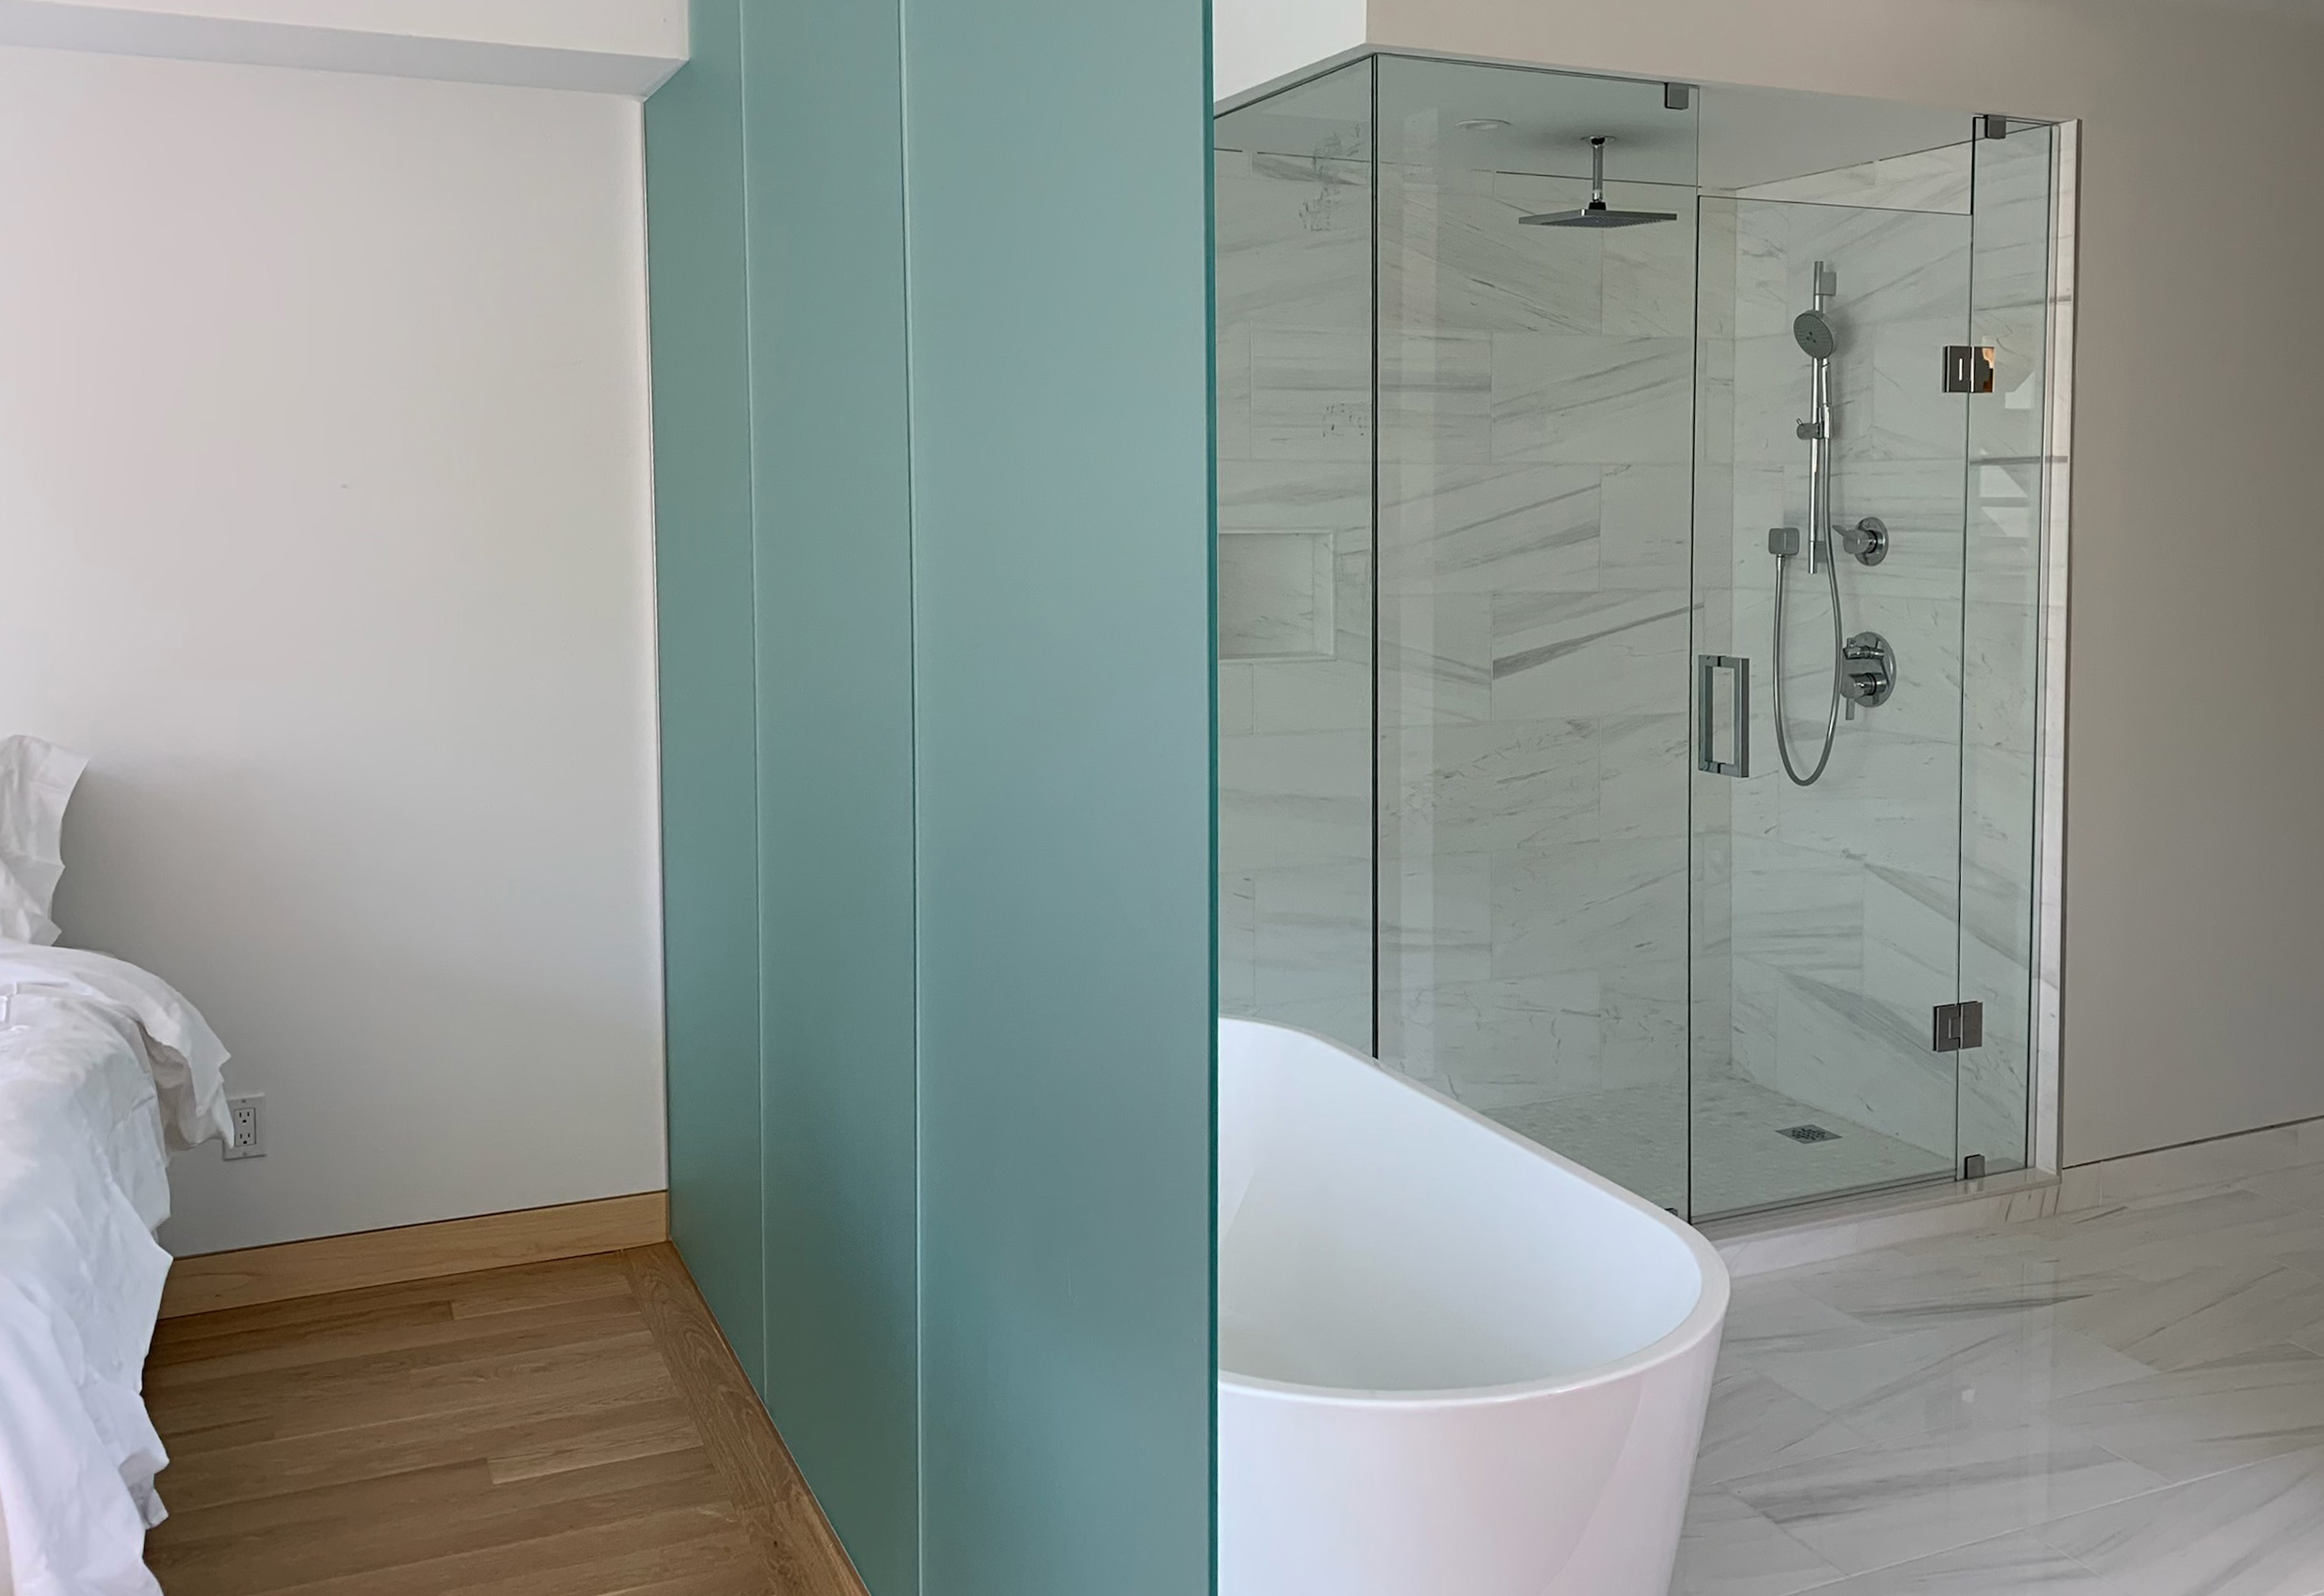 Glass partition and shower enclosure